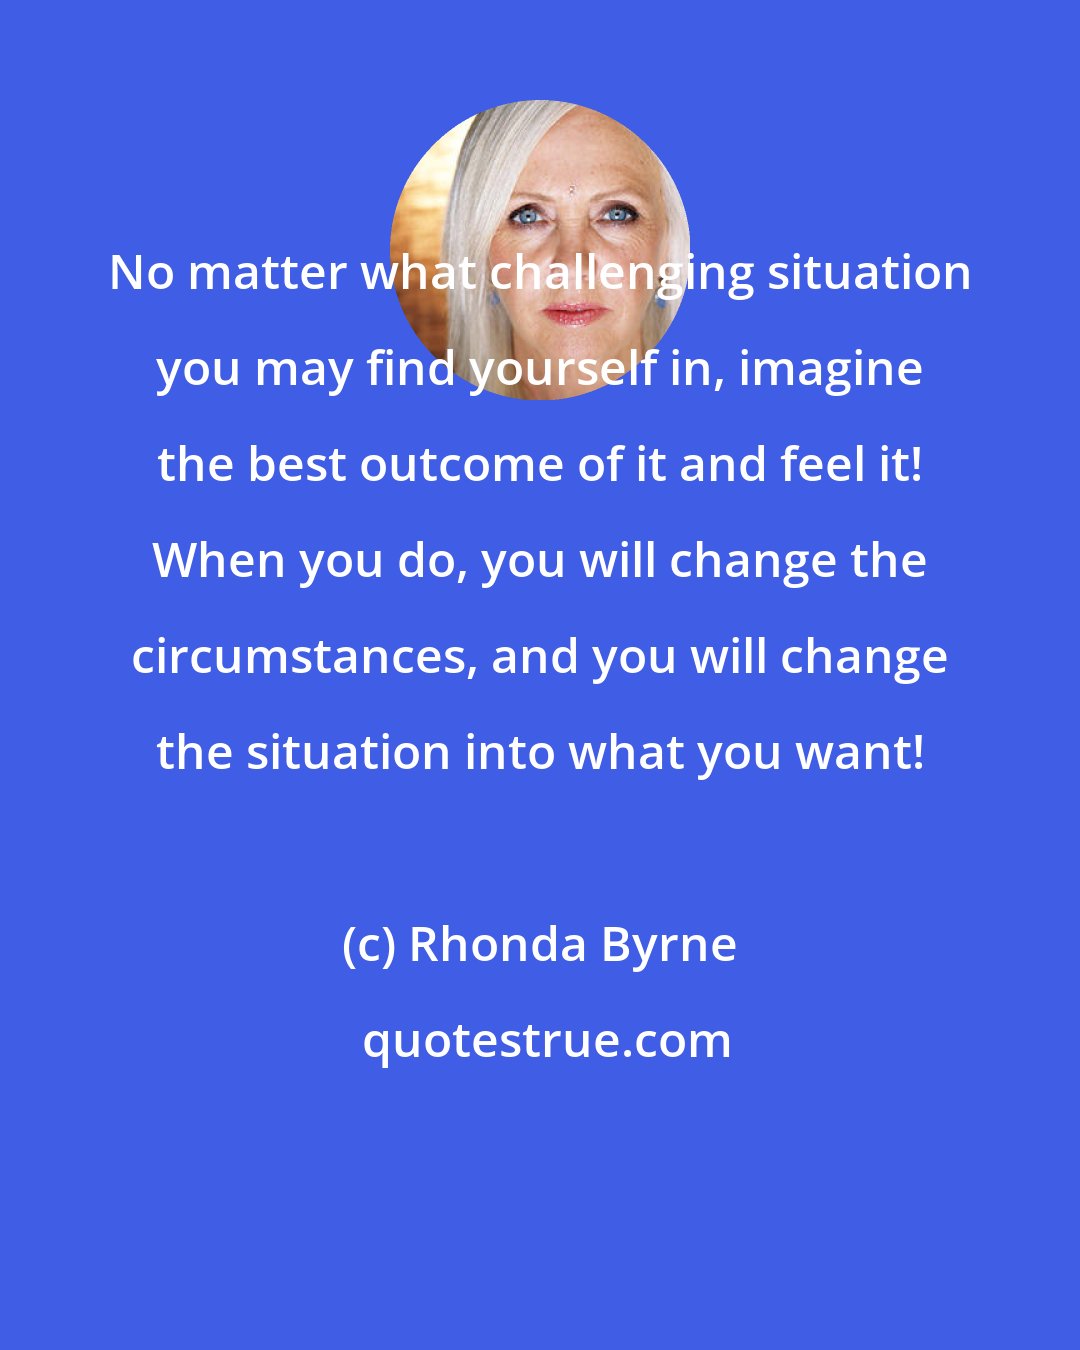 Rhonda Byrne: No matter what challenging situation you may find yourself in, imagine the best outcome of it and feel it! When you do, you will change the circumstances, and you will change the situation into what you want!